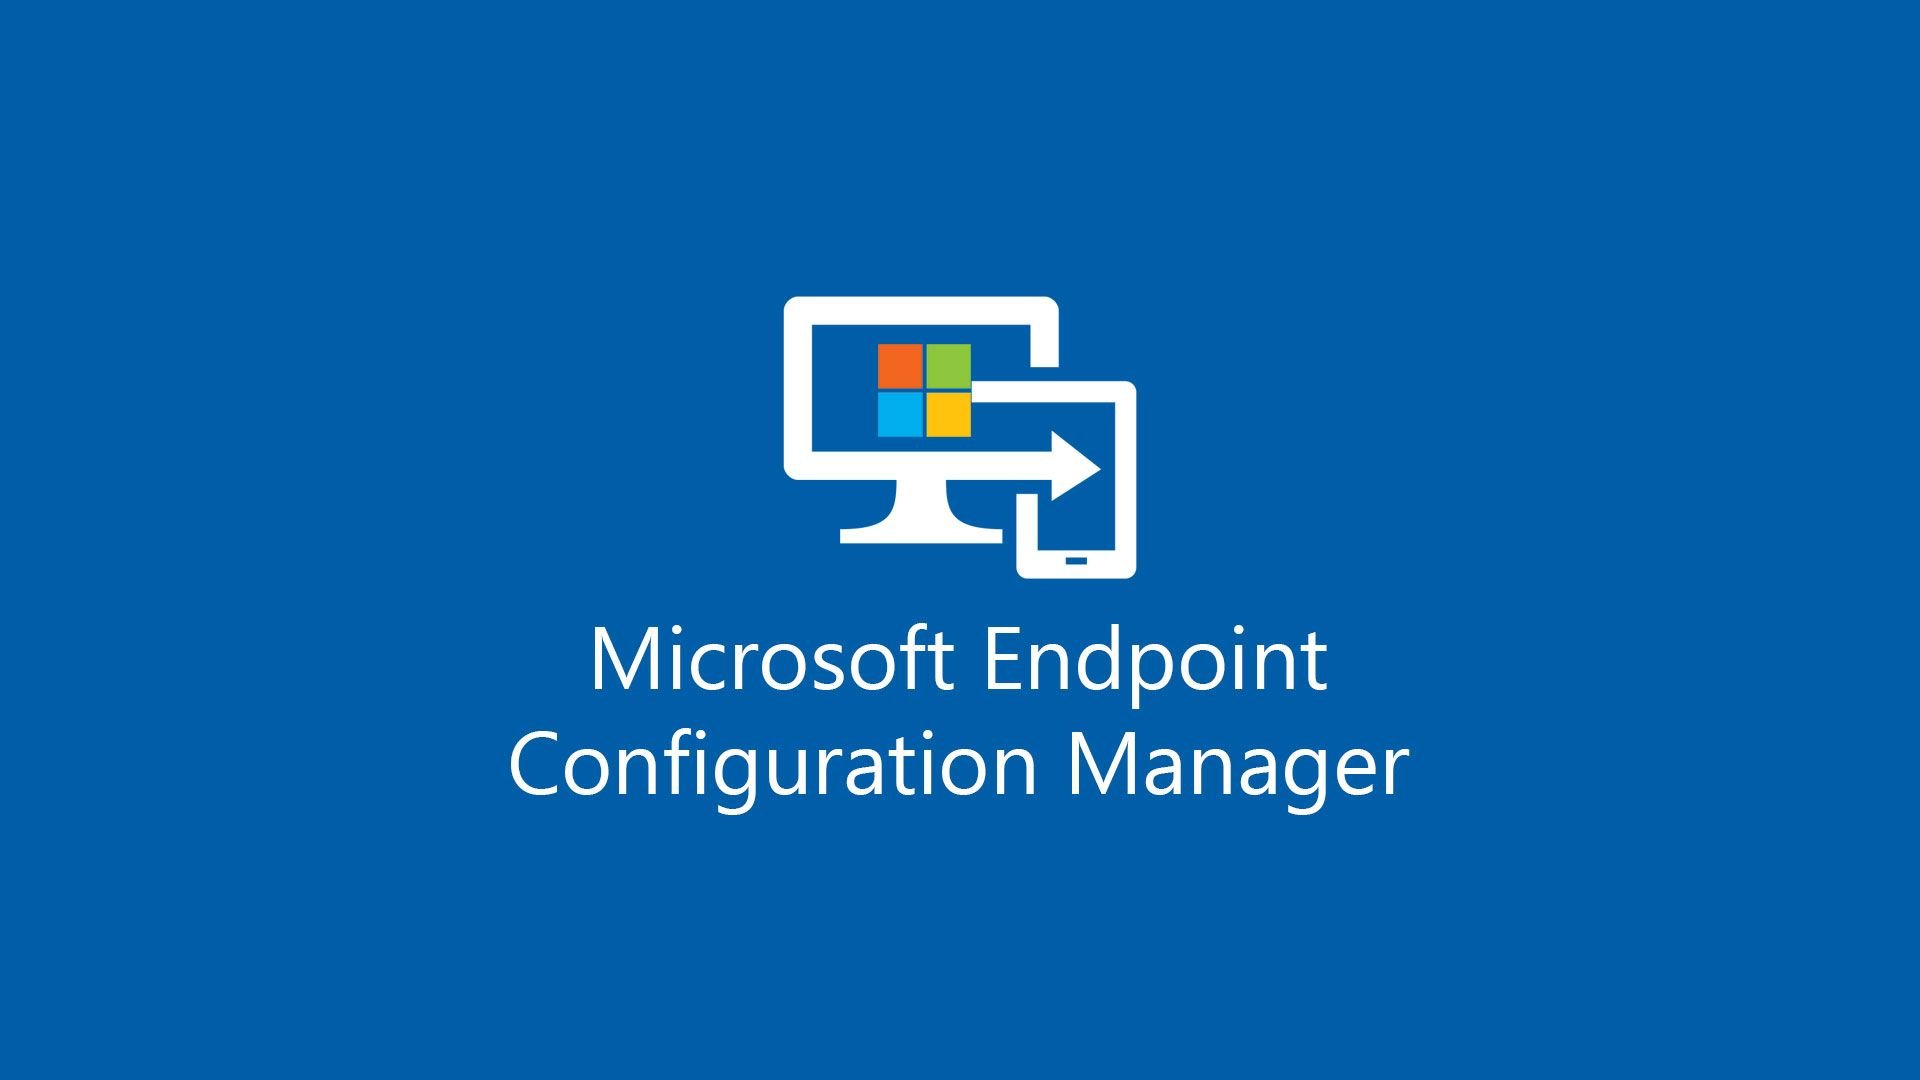 Silvio Di Benedetto. Microsoft Endpoint Configuration Manager: How To Import Manual Patches To Fix Windows 10 2021 03 Issue